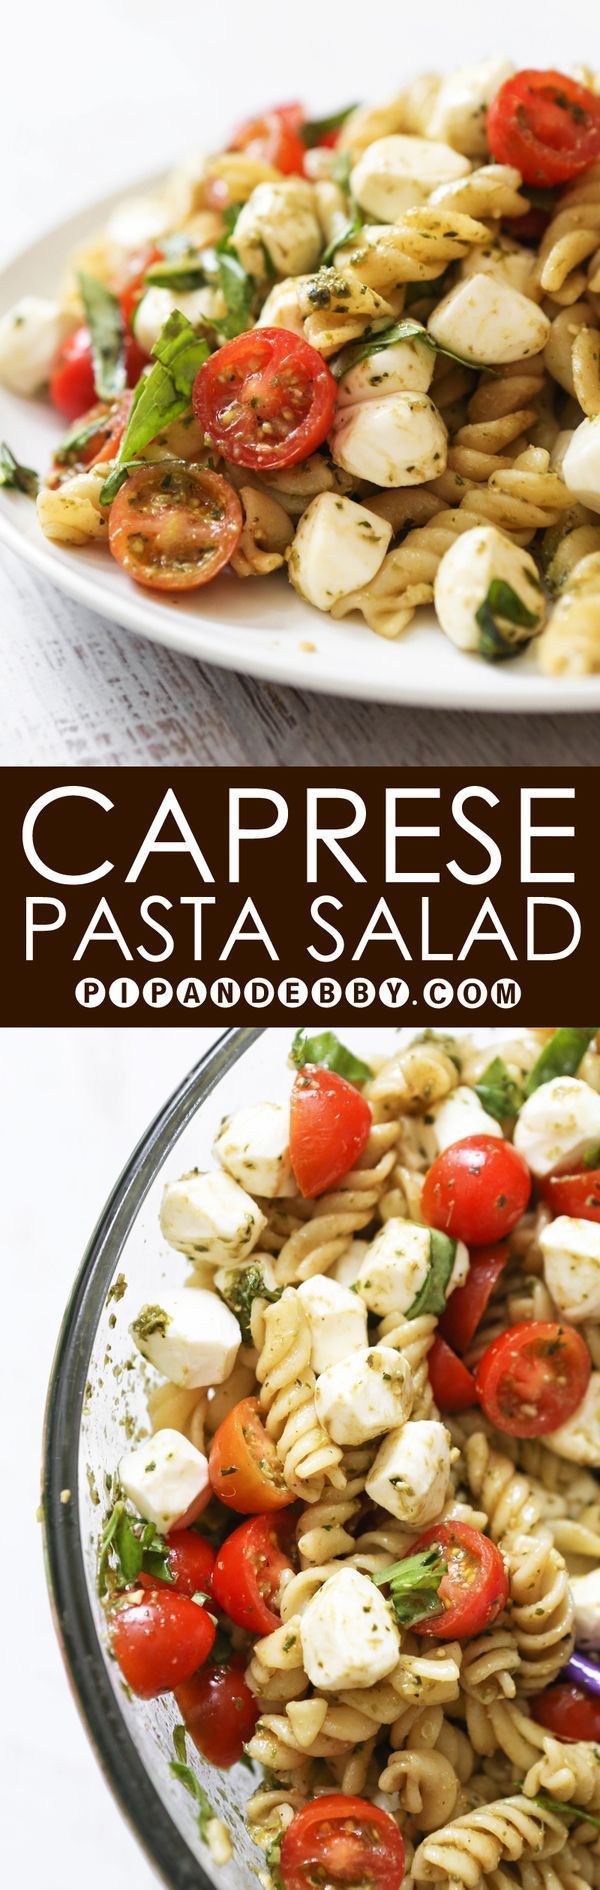 Caprese Pasta Salad | This perfect combination of ingredients is great as an appet